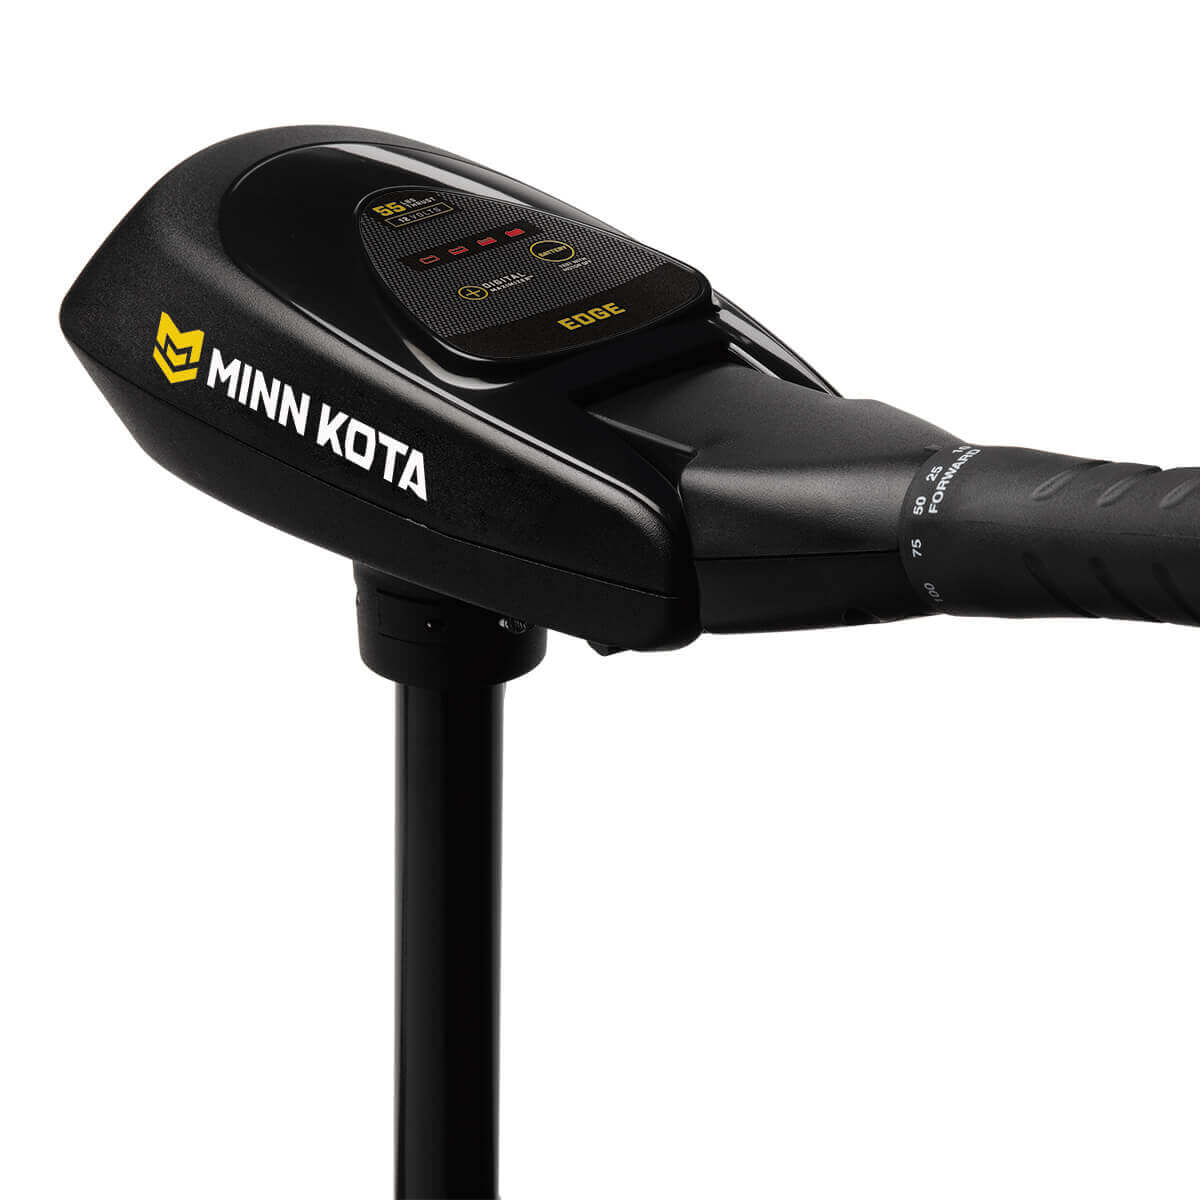 Minn Kota Speed Controllers: The Top 10 Features You Need